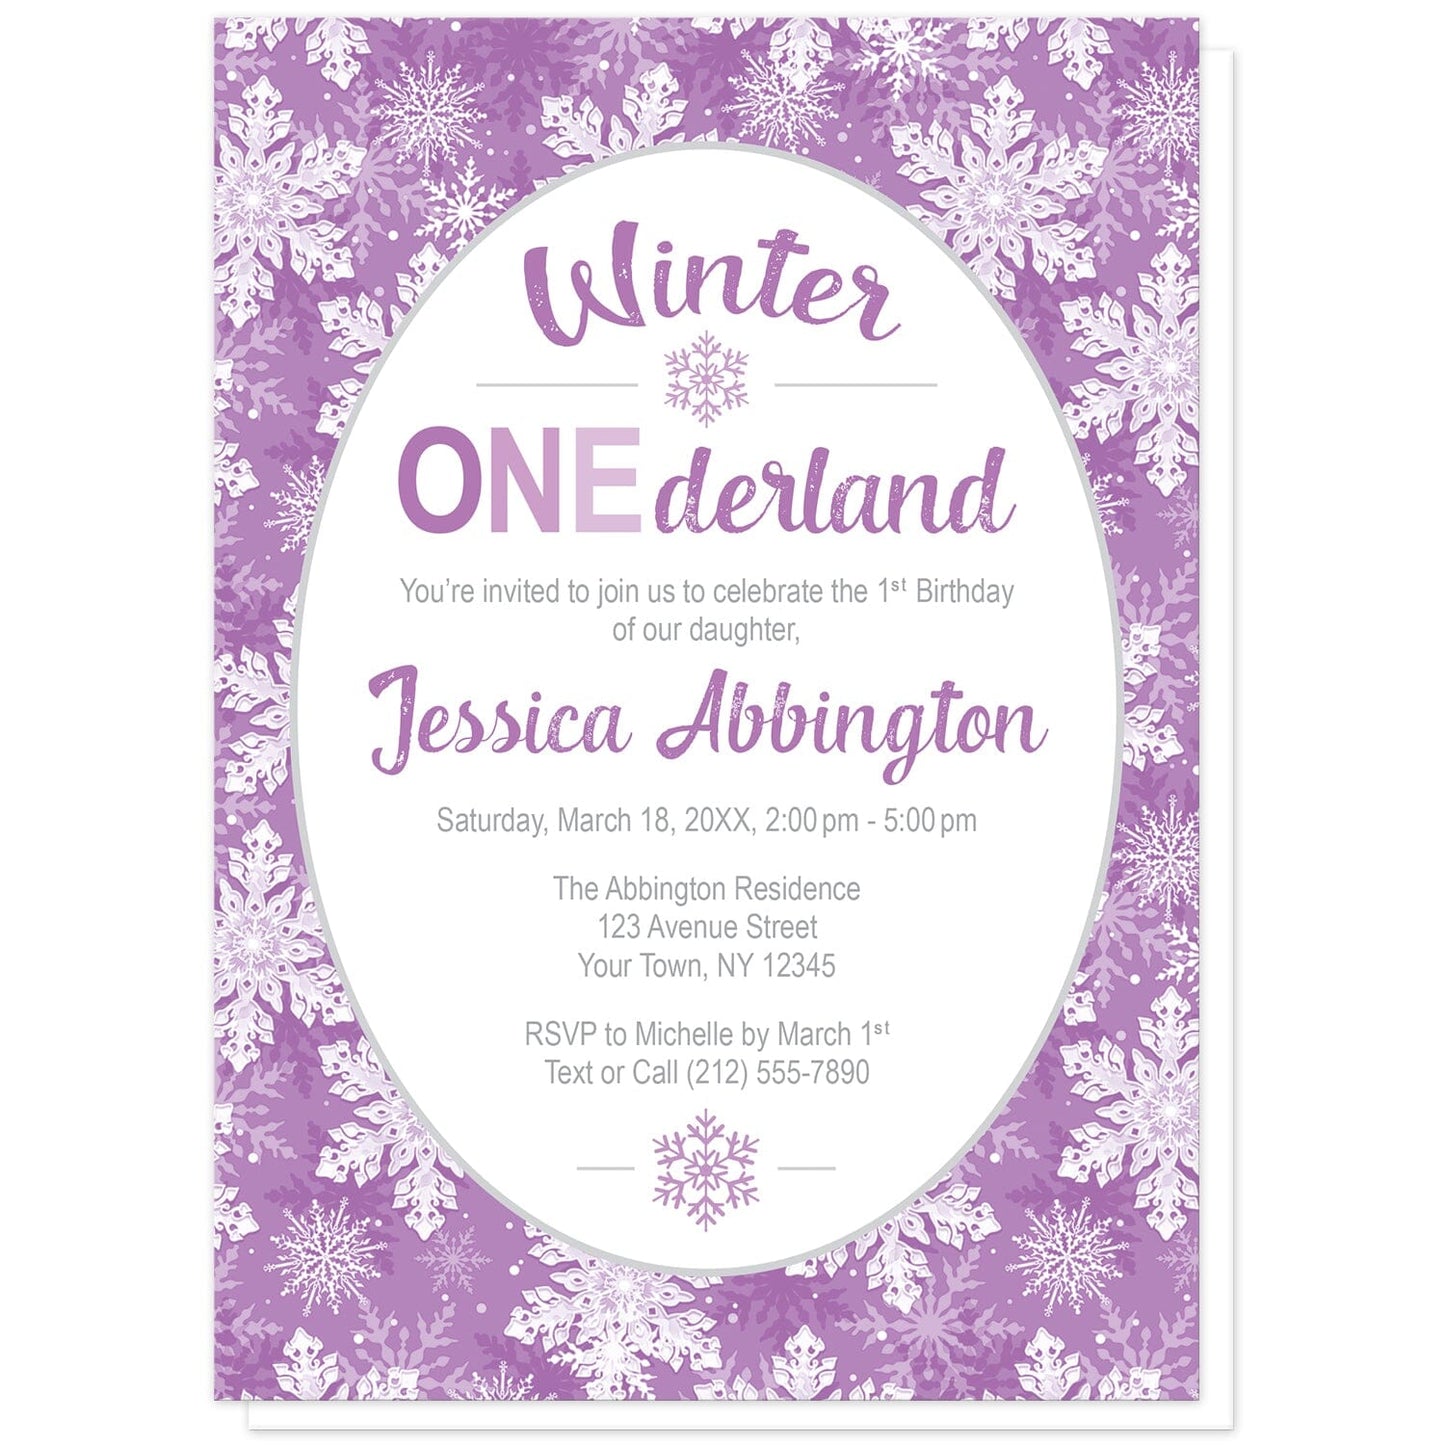 Purple Snowflake 1st Birthday Winter Onederland Invitations at Artistically Invited. Beautifully ornate purple snowflake 1st birthday Winter Onederland invitations designed with your personalized 1st birthday party details custom printed in purple and gray in a white oval frame design over a pretty purple and white snowflake pattern background.